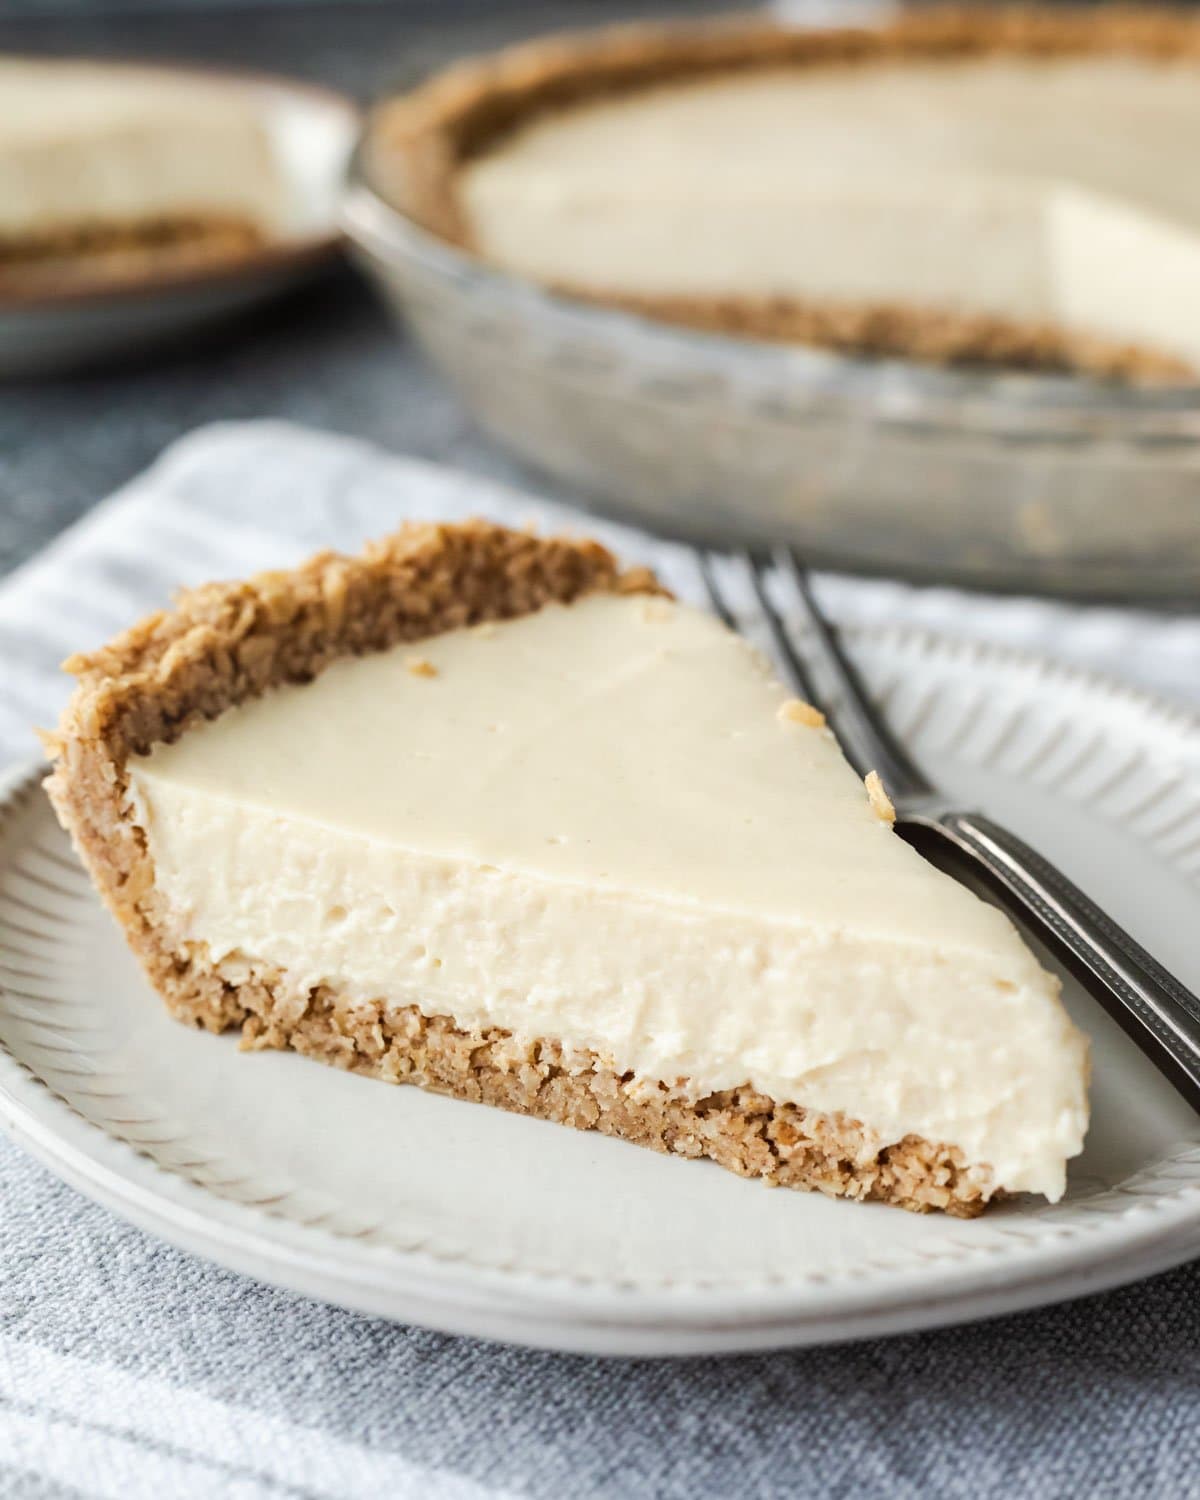 A slice of creamy vegan cheesecake on a plate showing the oatmeal pie crust texture.